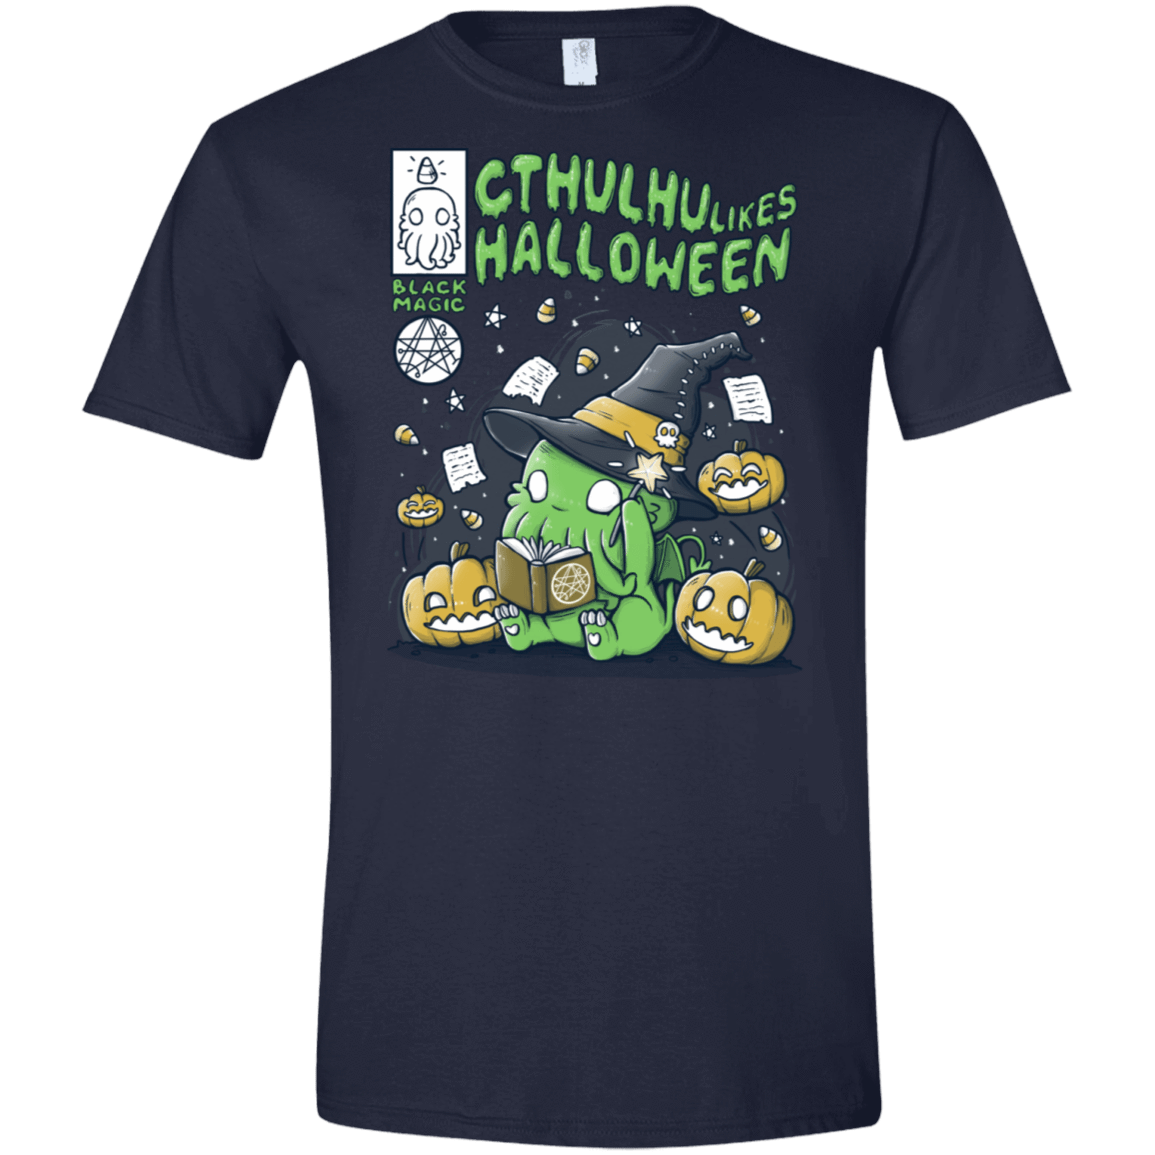 T-Shirts Navy / S Cthulhu Likes Halloween Men's Semi-Fitted Softstyle